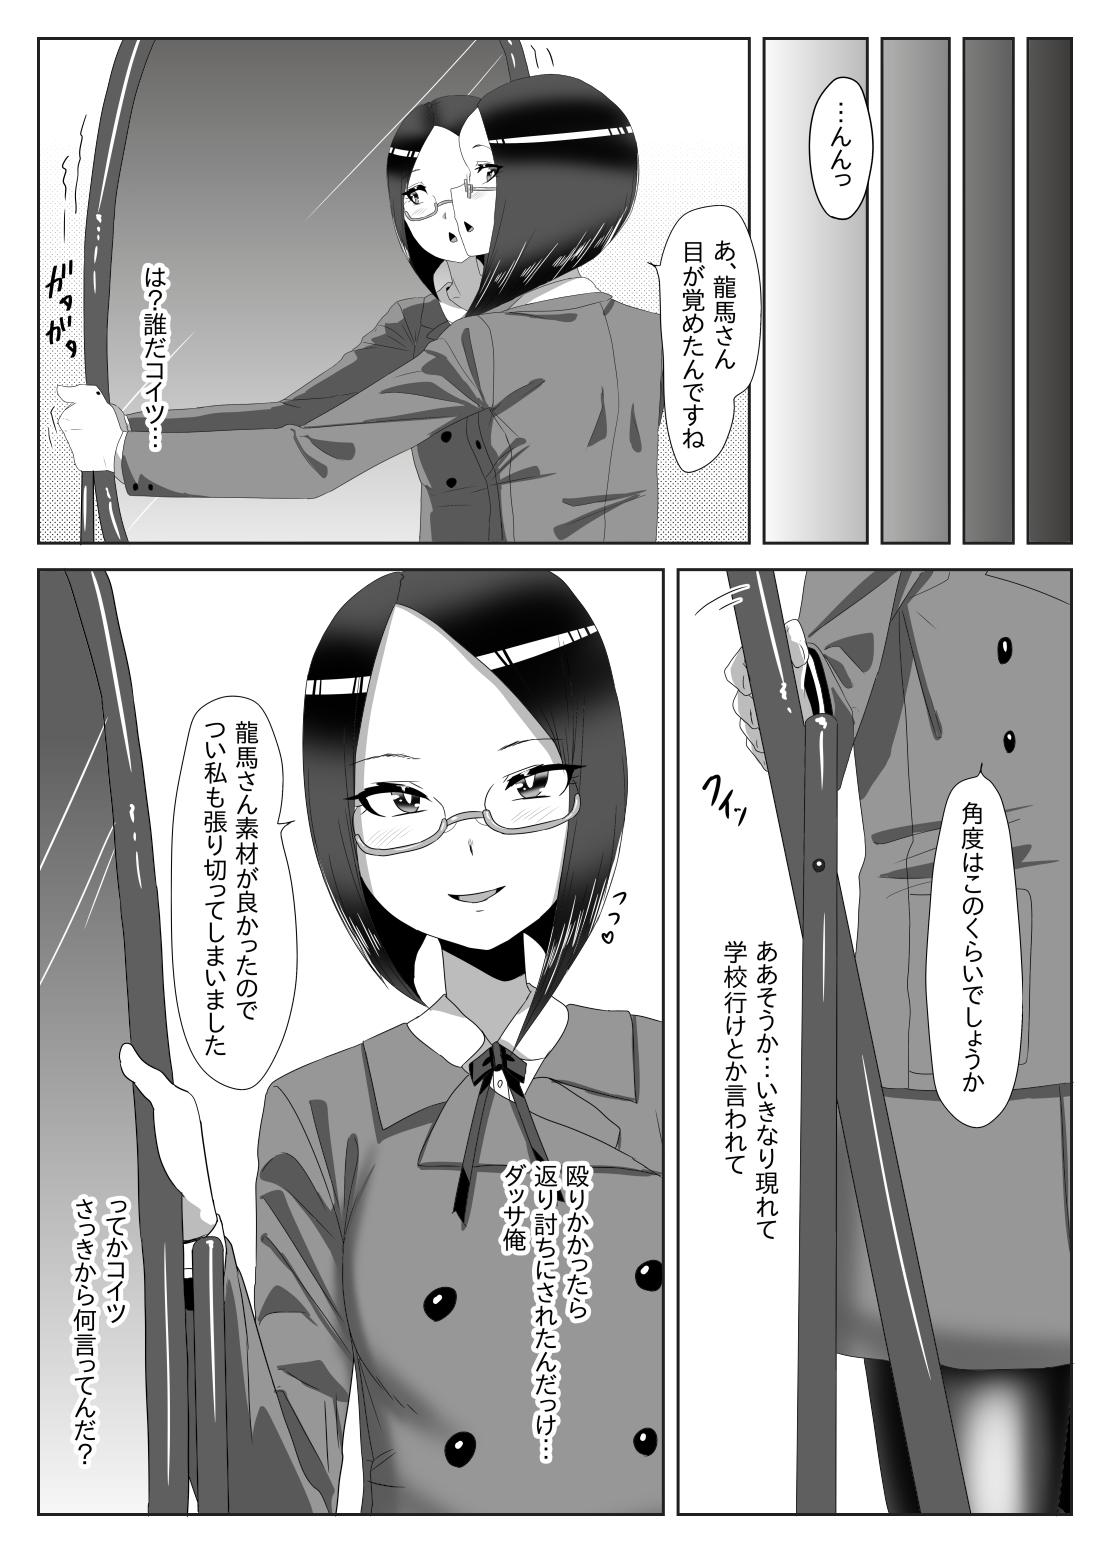 Anal ふたなり生徒会長の不良男の娘更生計画1 Analfucking - Page 9